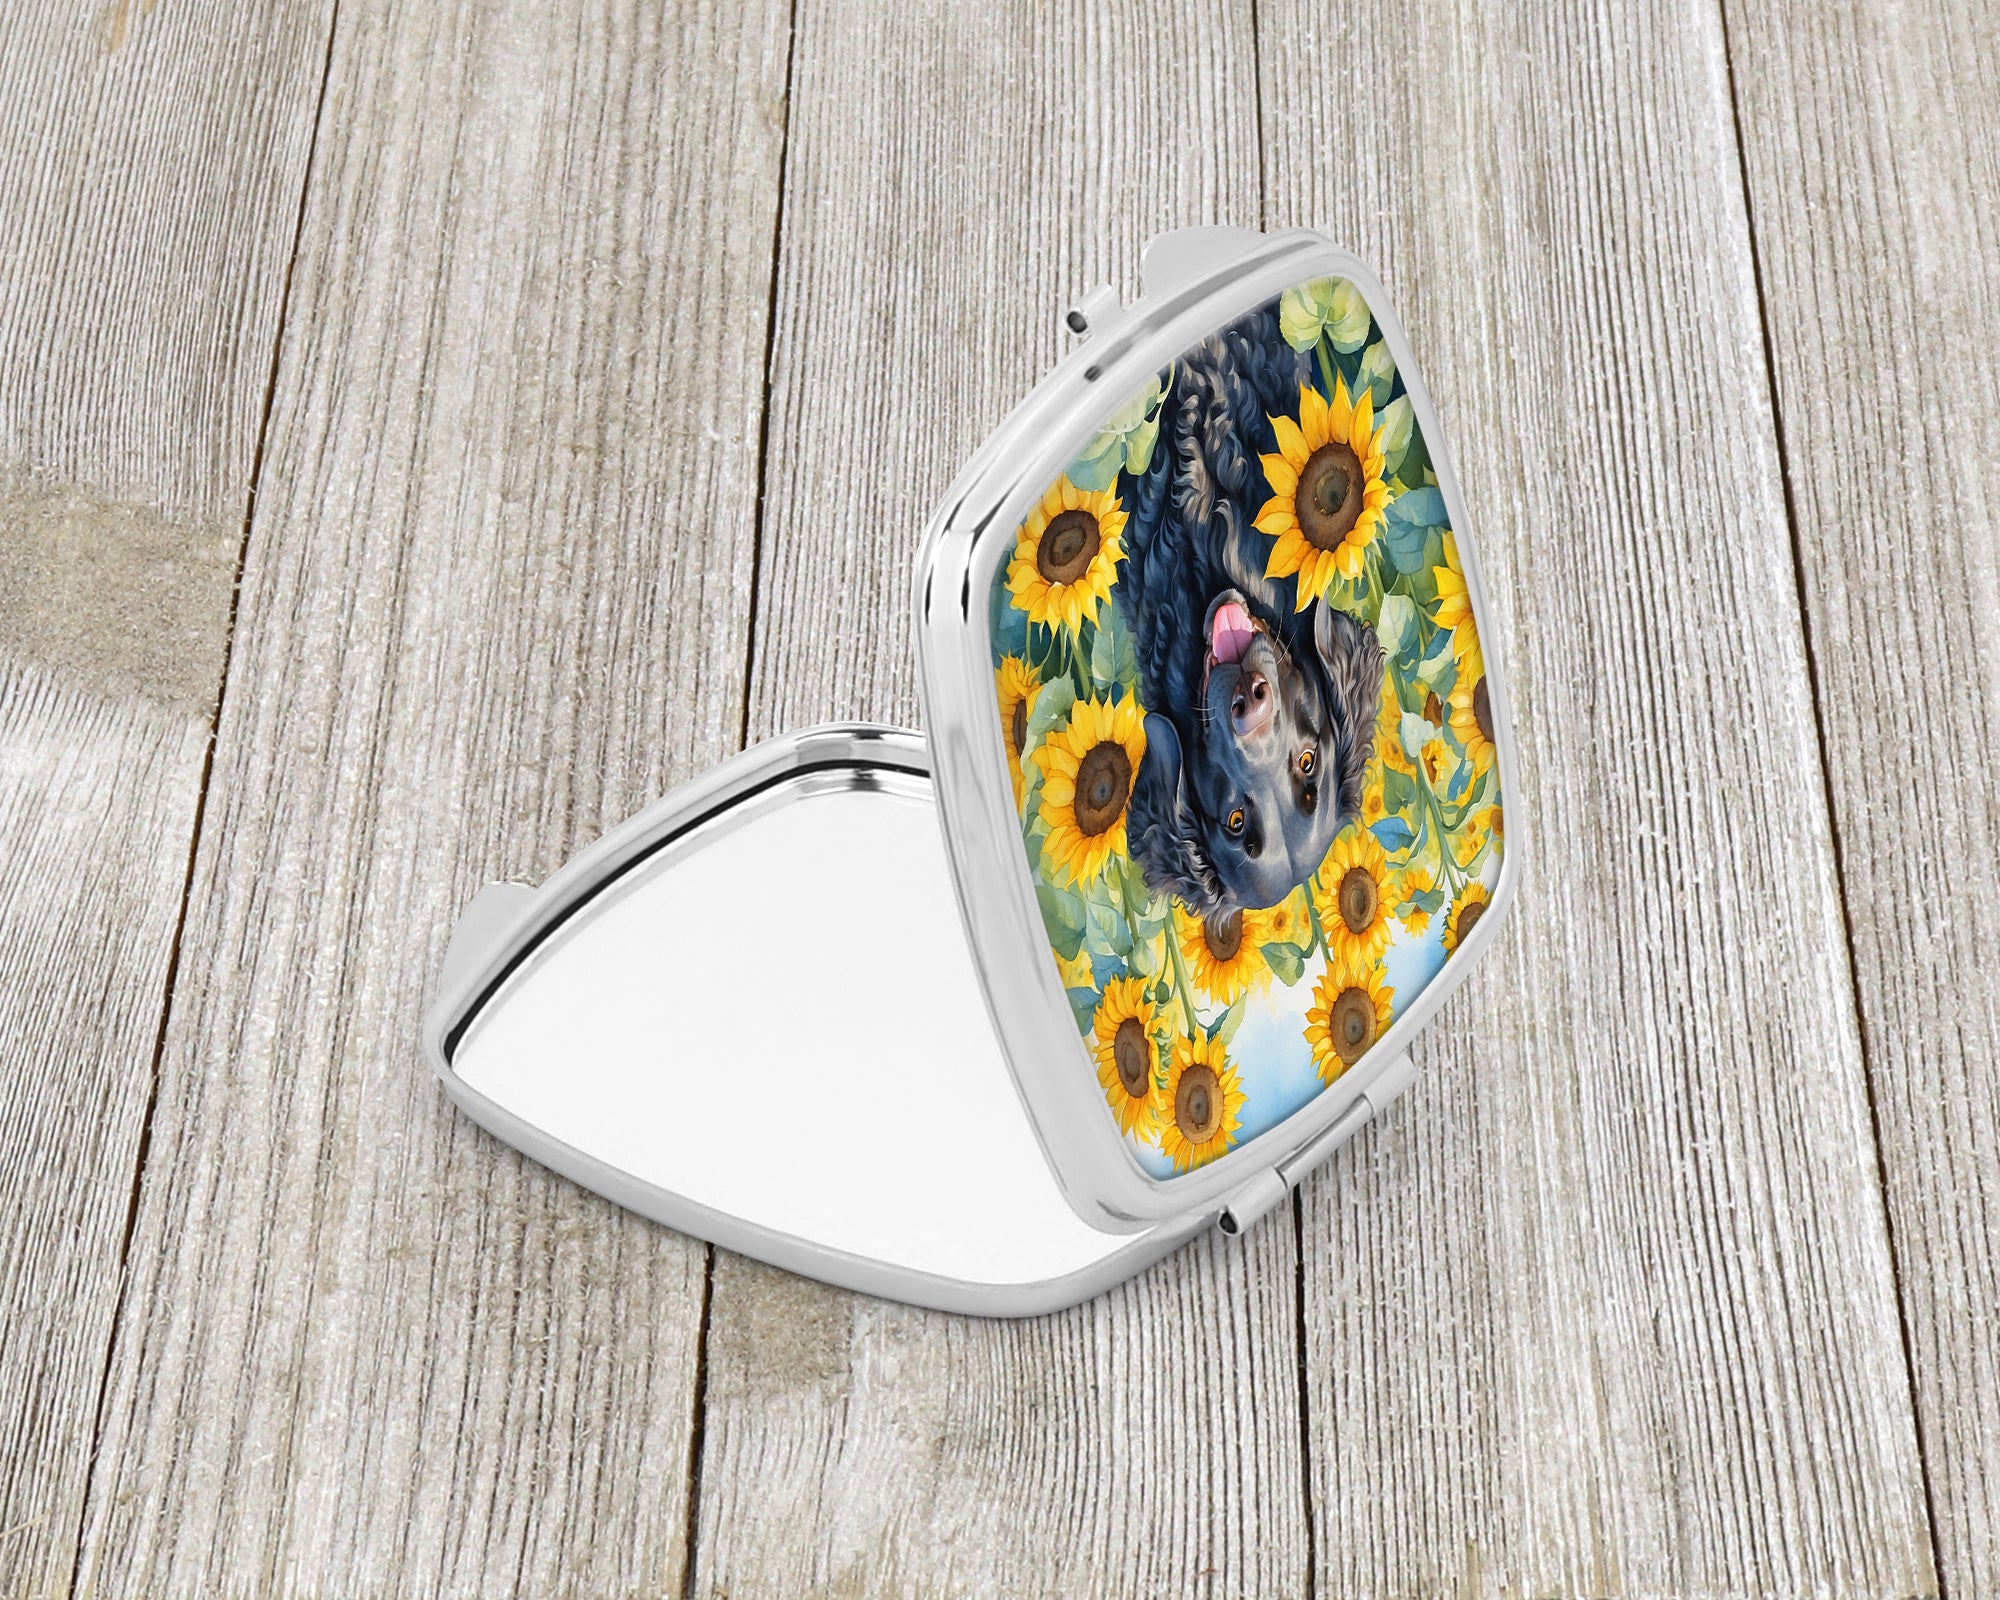 Curly-Coated Retriever in Sunflowers Compact Mirror